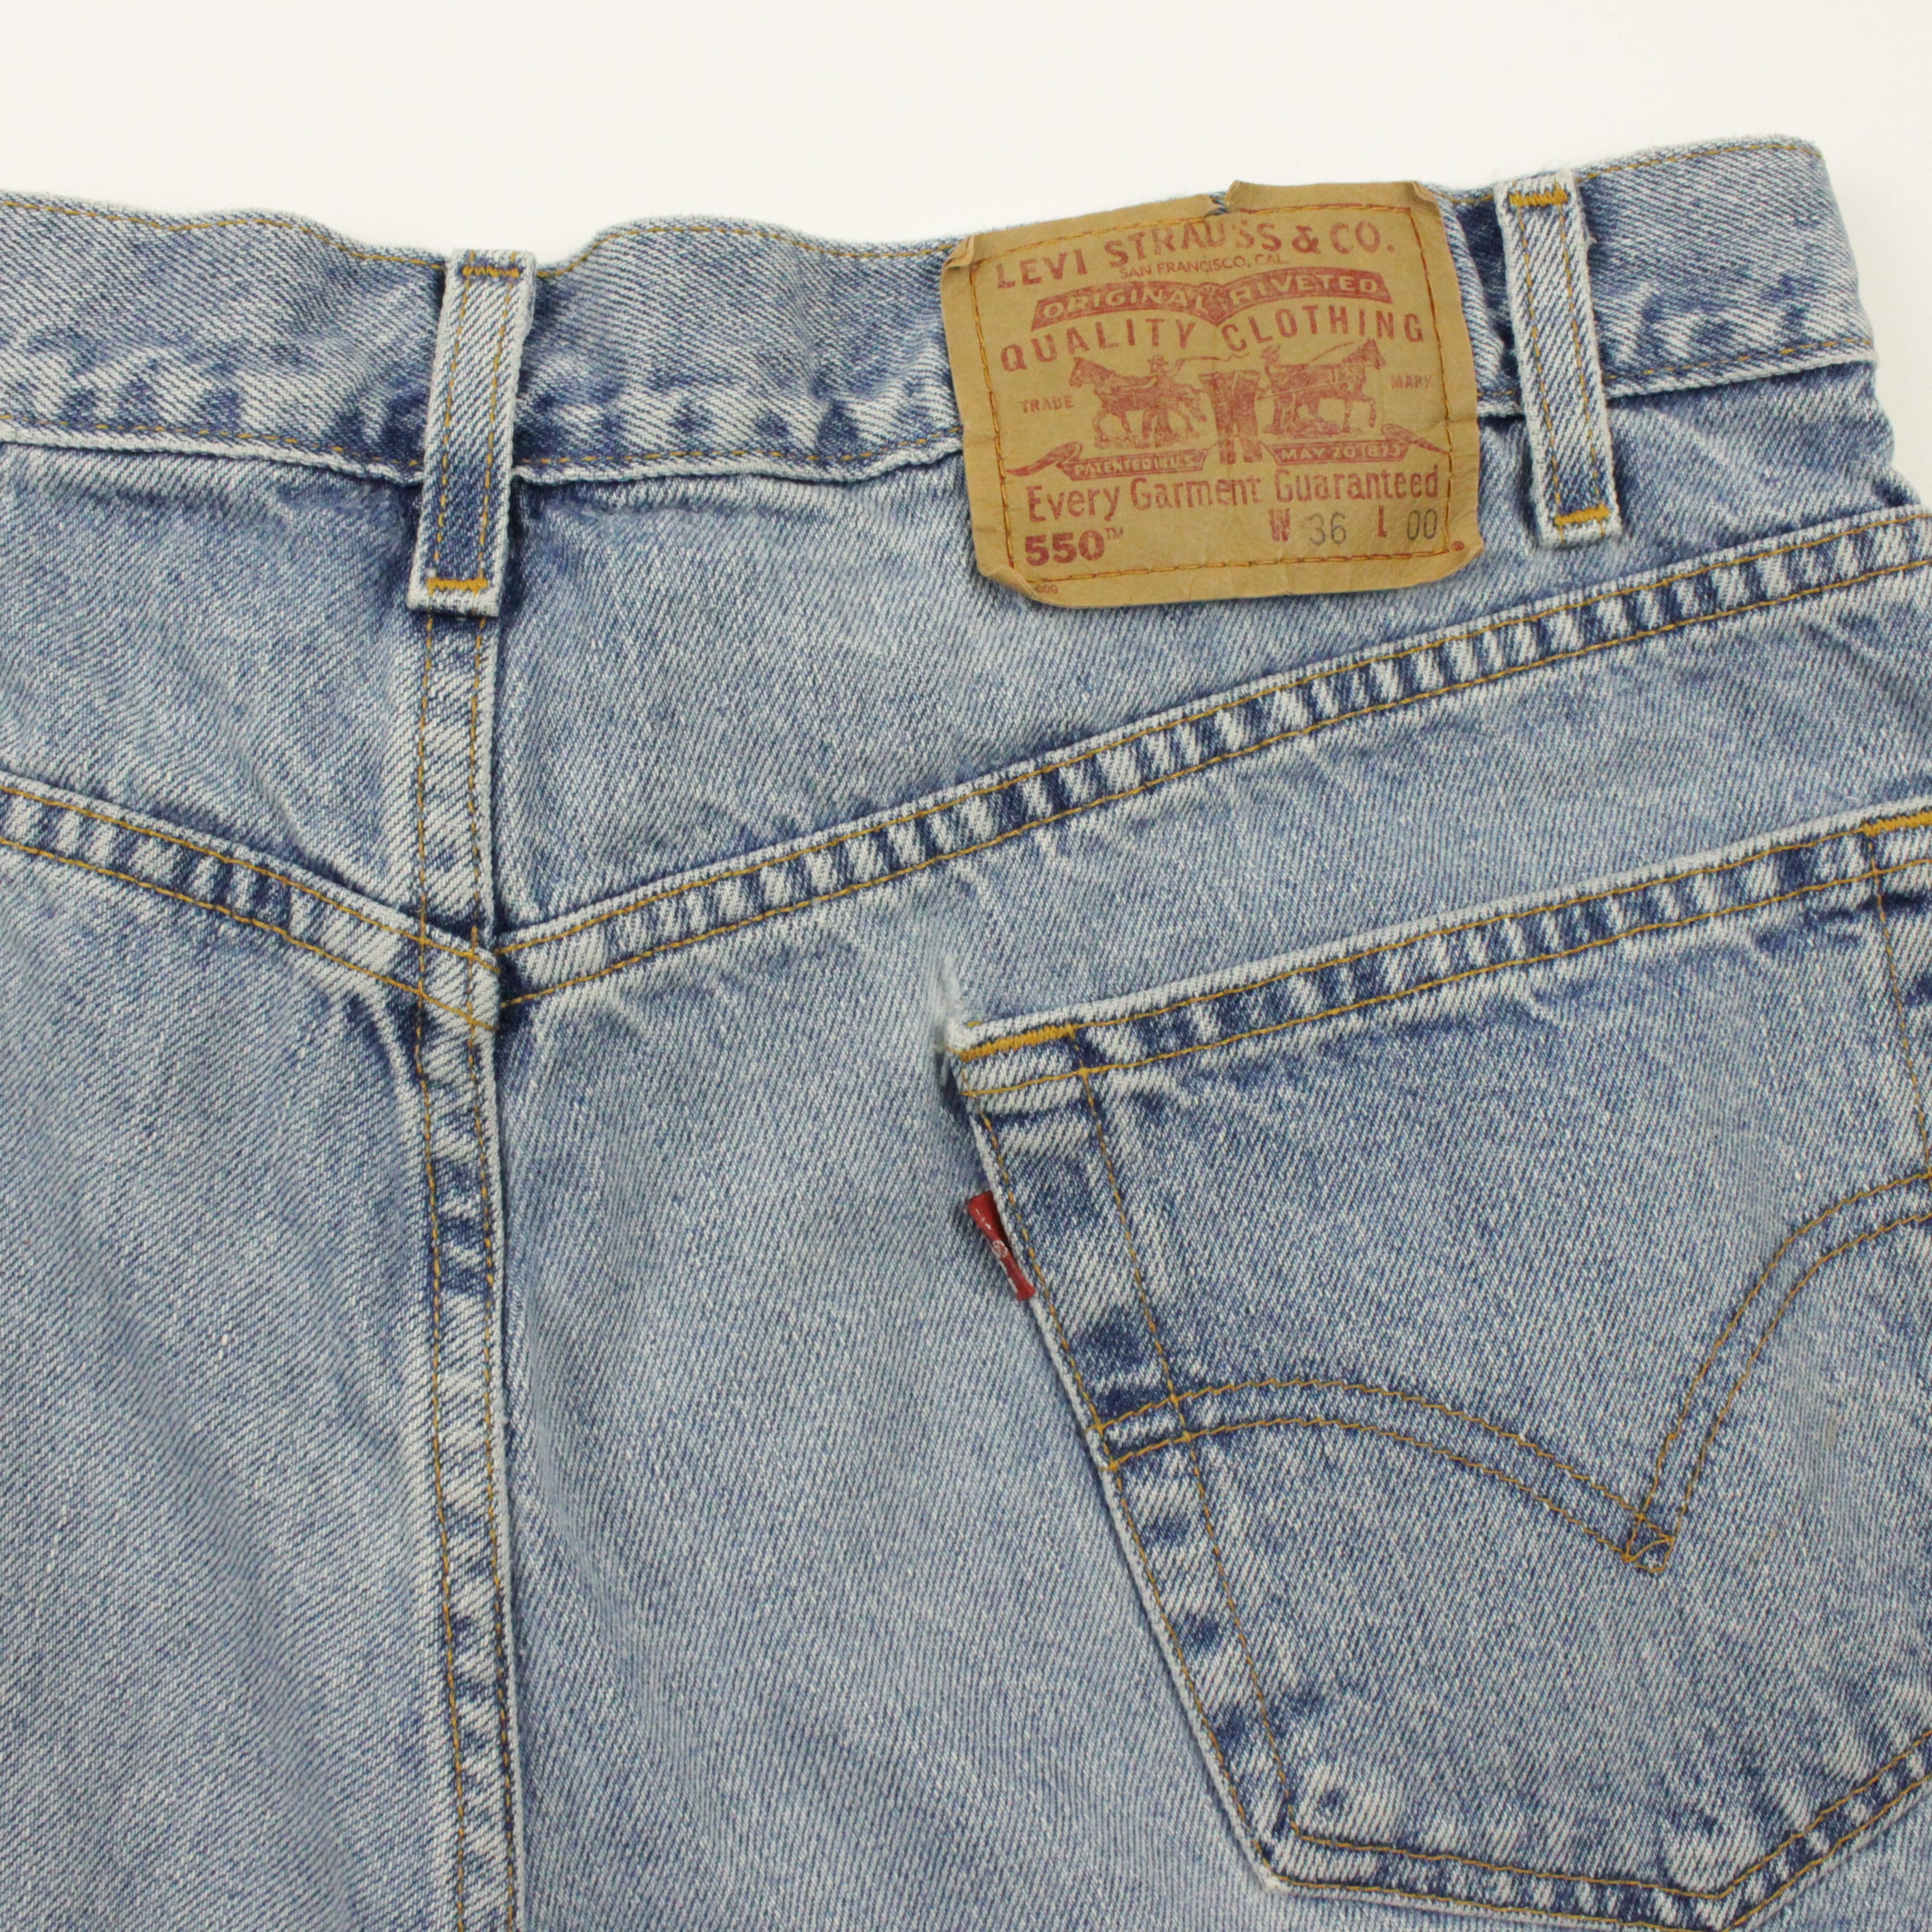 Vintage Levi's 550 Relaxed Fit Denim Shorts Size 36